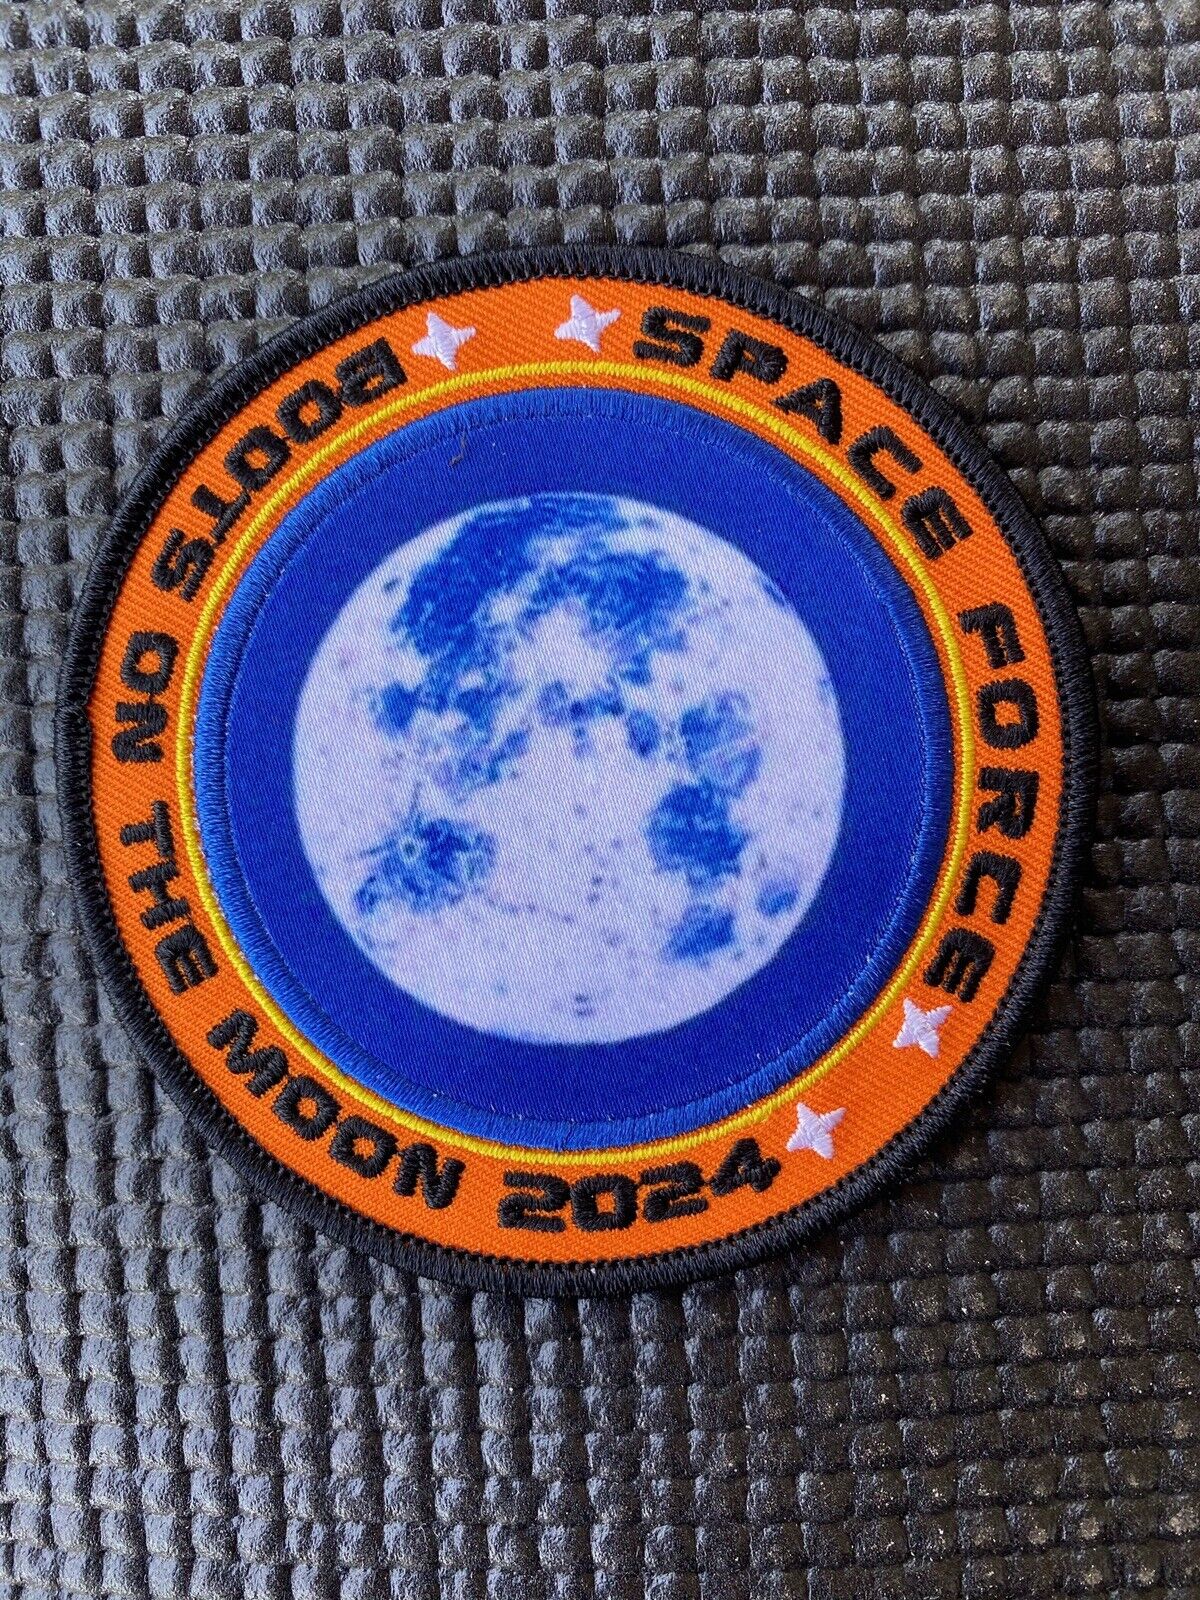 US SPACE FORCE PATCH - NASA ARTEMIS 2024 BOOTS ON THE MOON- 3.5”